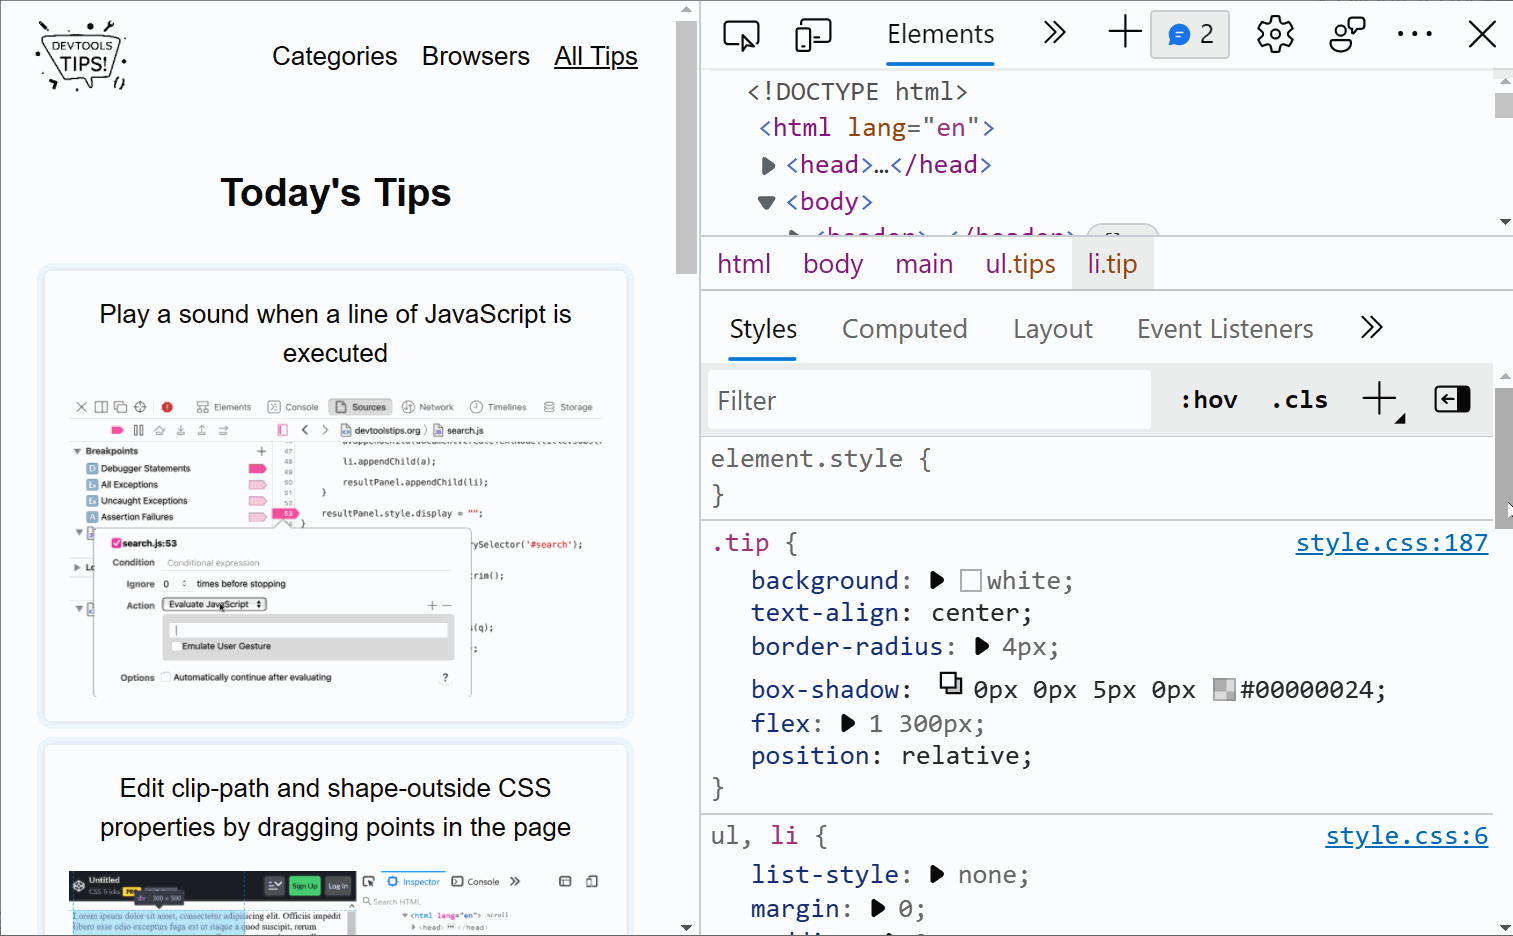 GIF animation showing the shadow editor in Edge's Styles pane